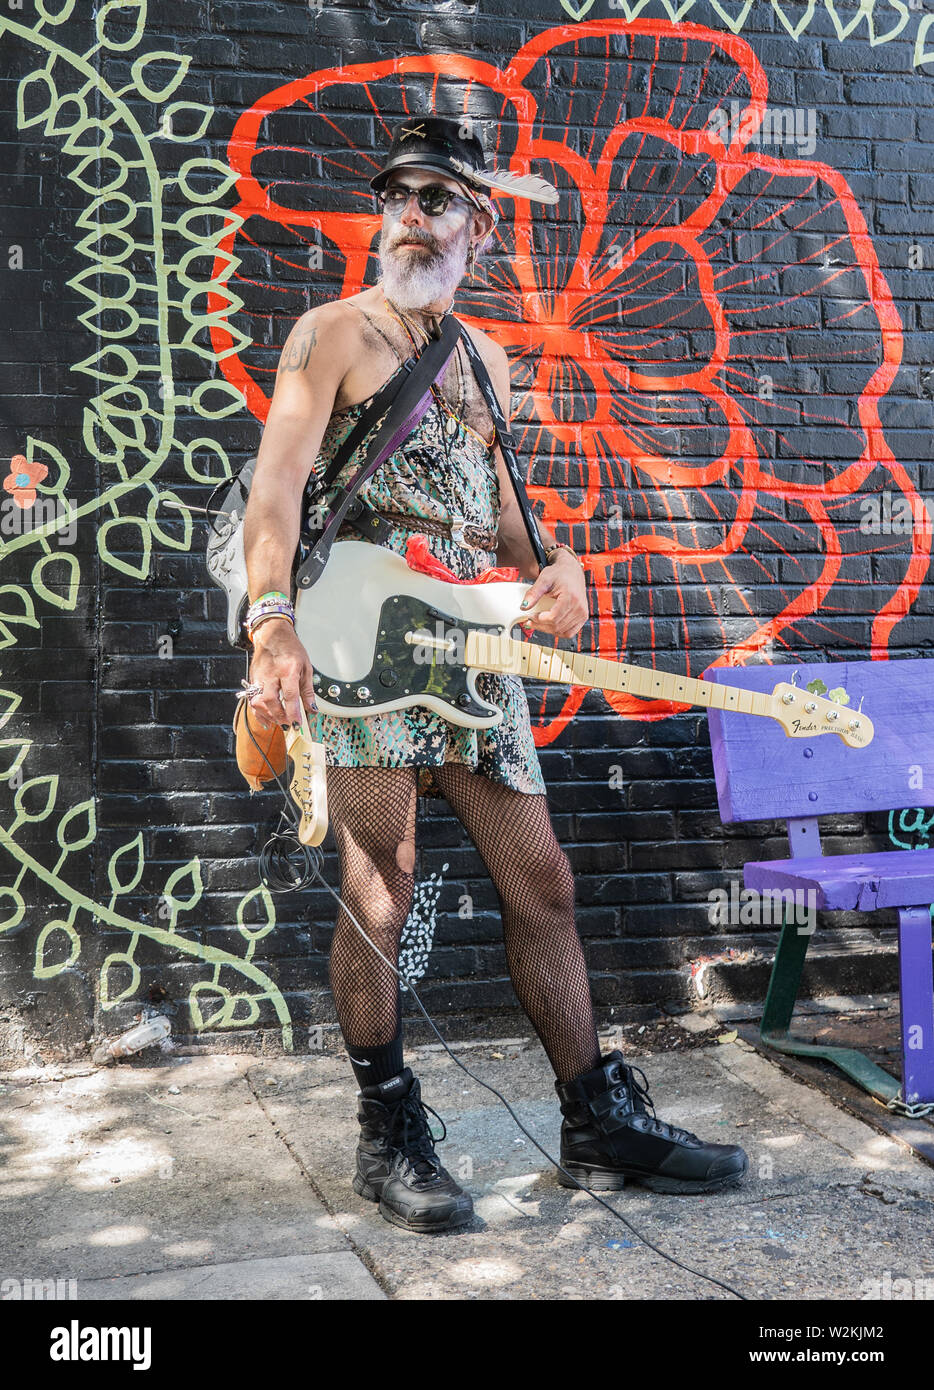 a portrait of an eccentric adult man dressed in unusual clothes on south street in south philadelphia Stock Photo